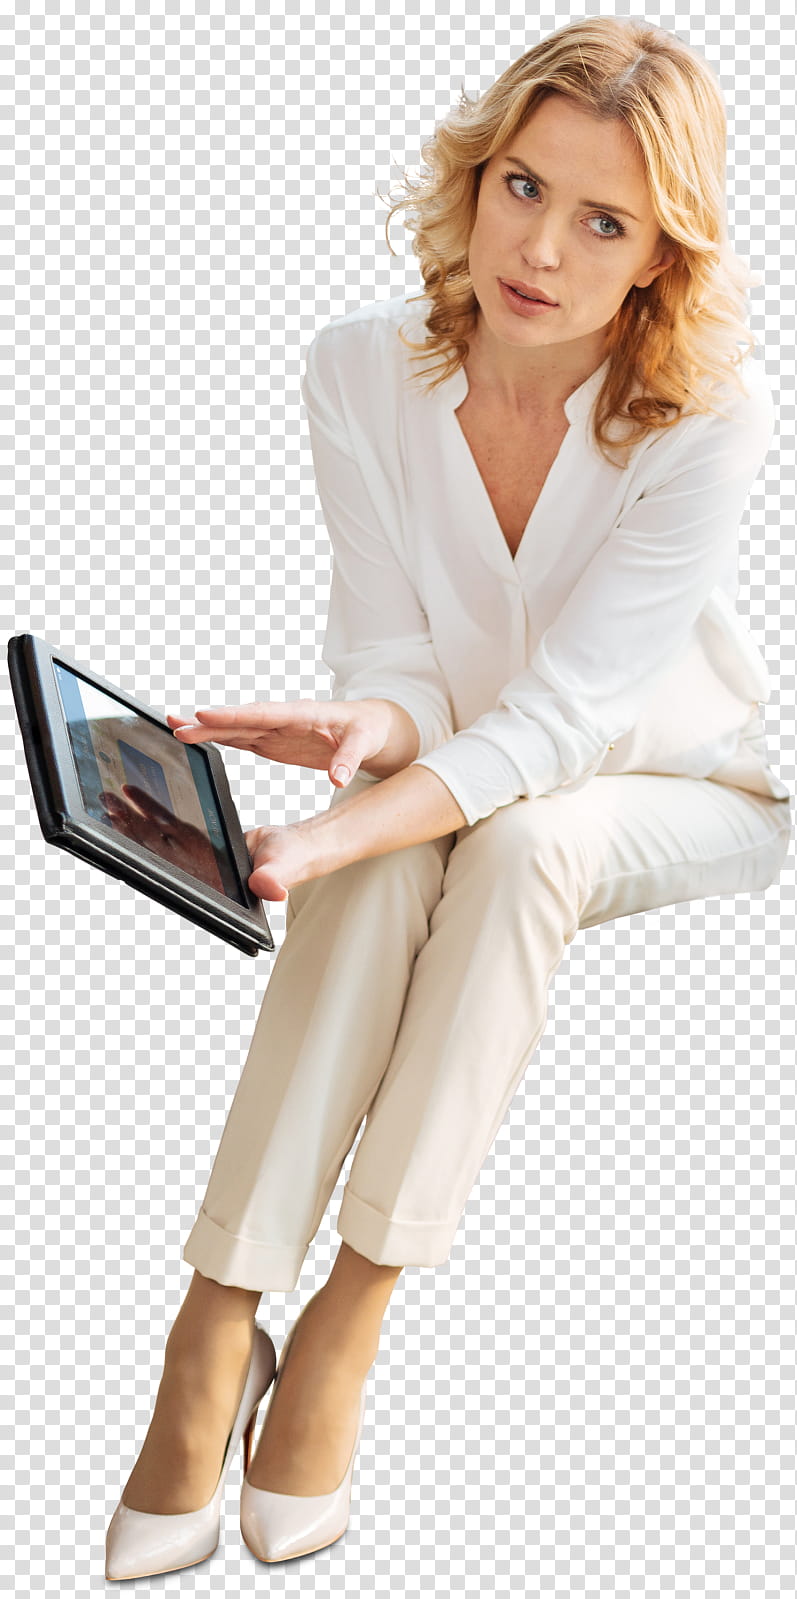 Business Woman, Businessperson, Drawing, Visualization, Architecture, Rendering, Human, Tablet Computers transparent background PNG clipart